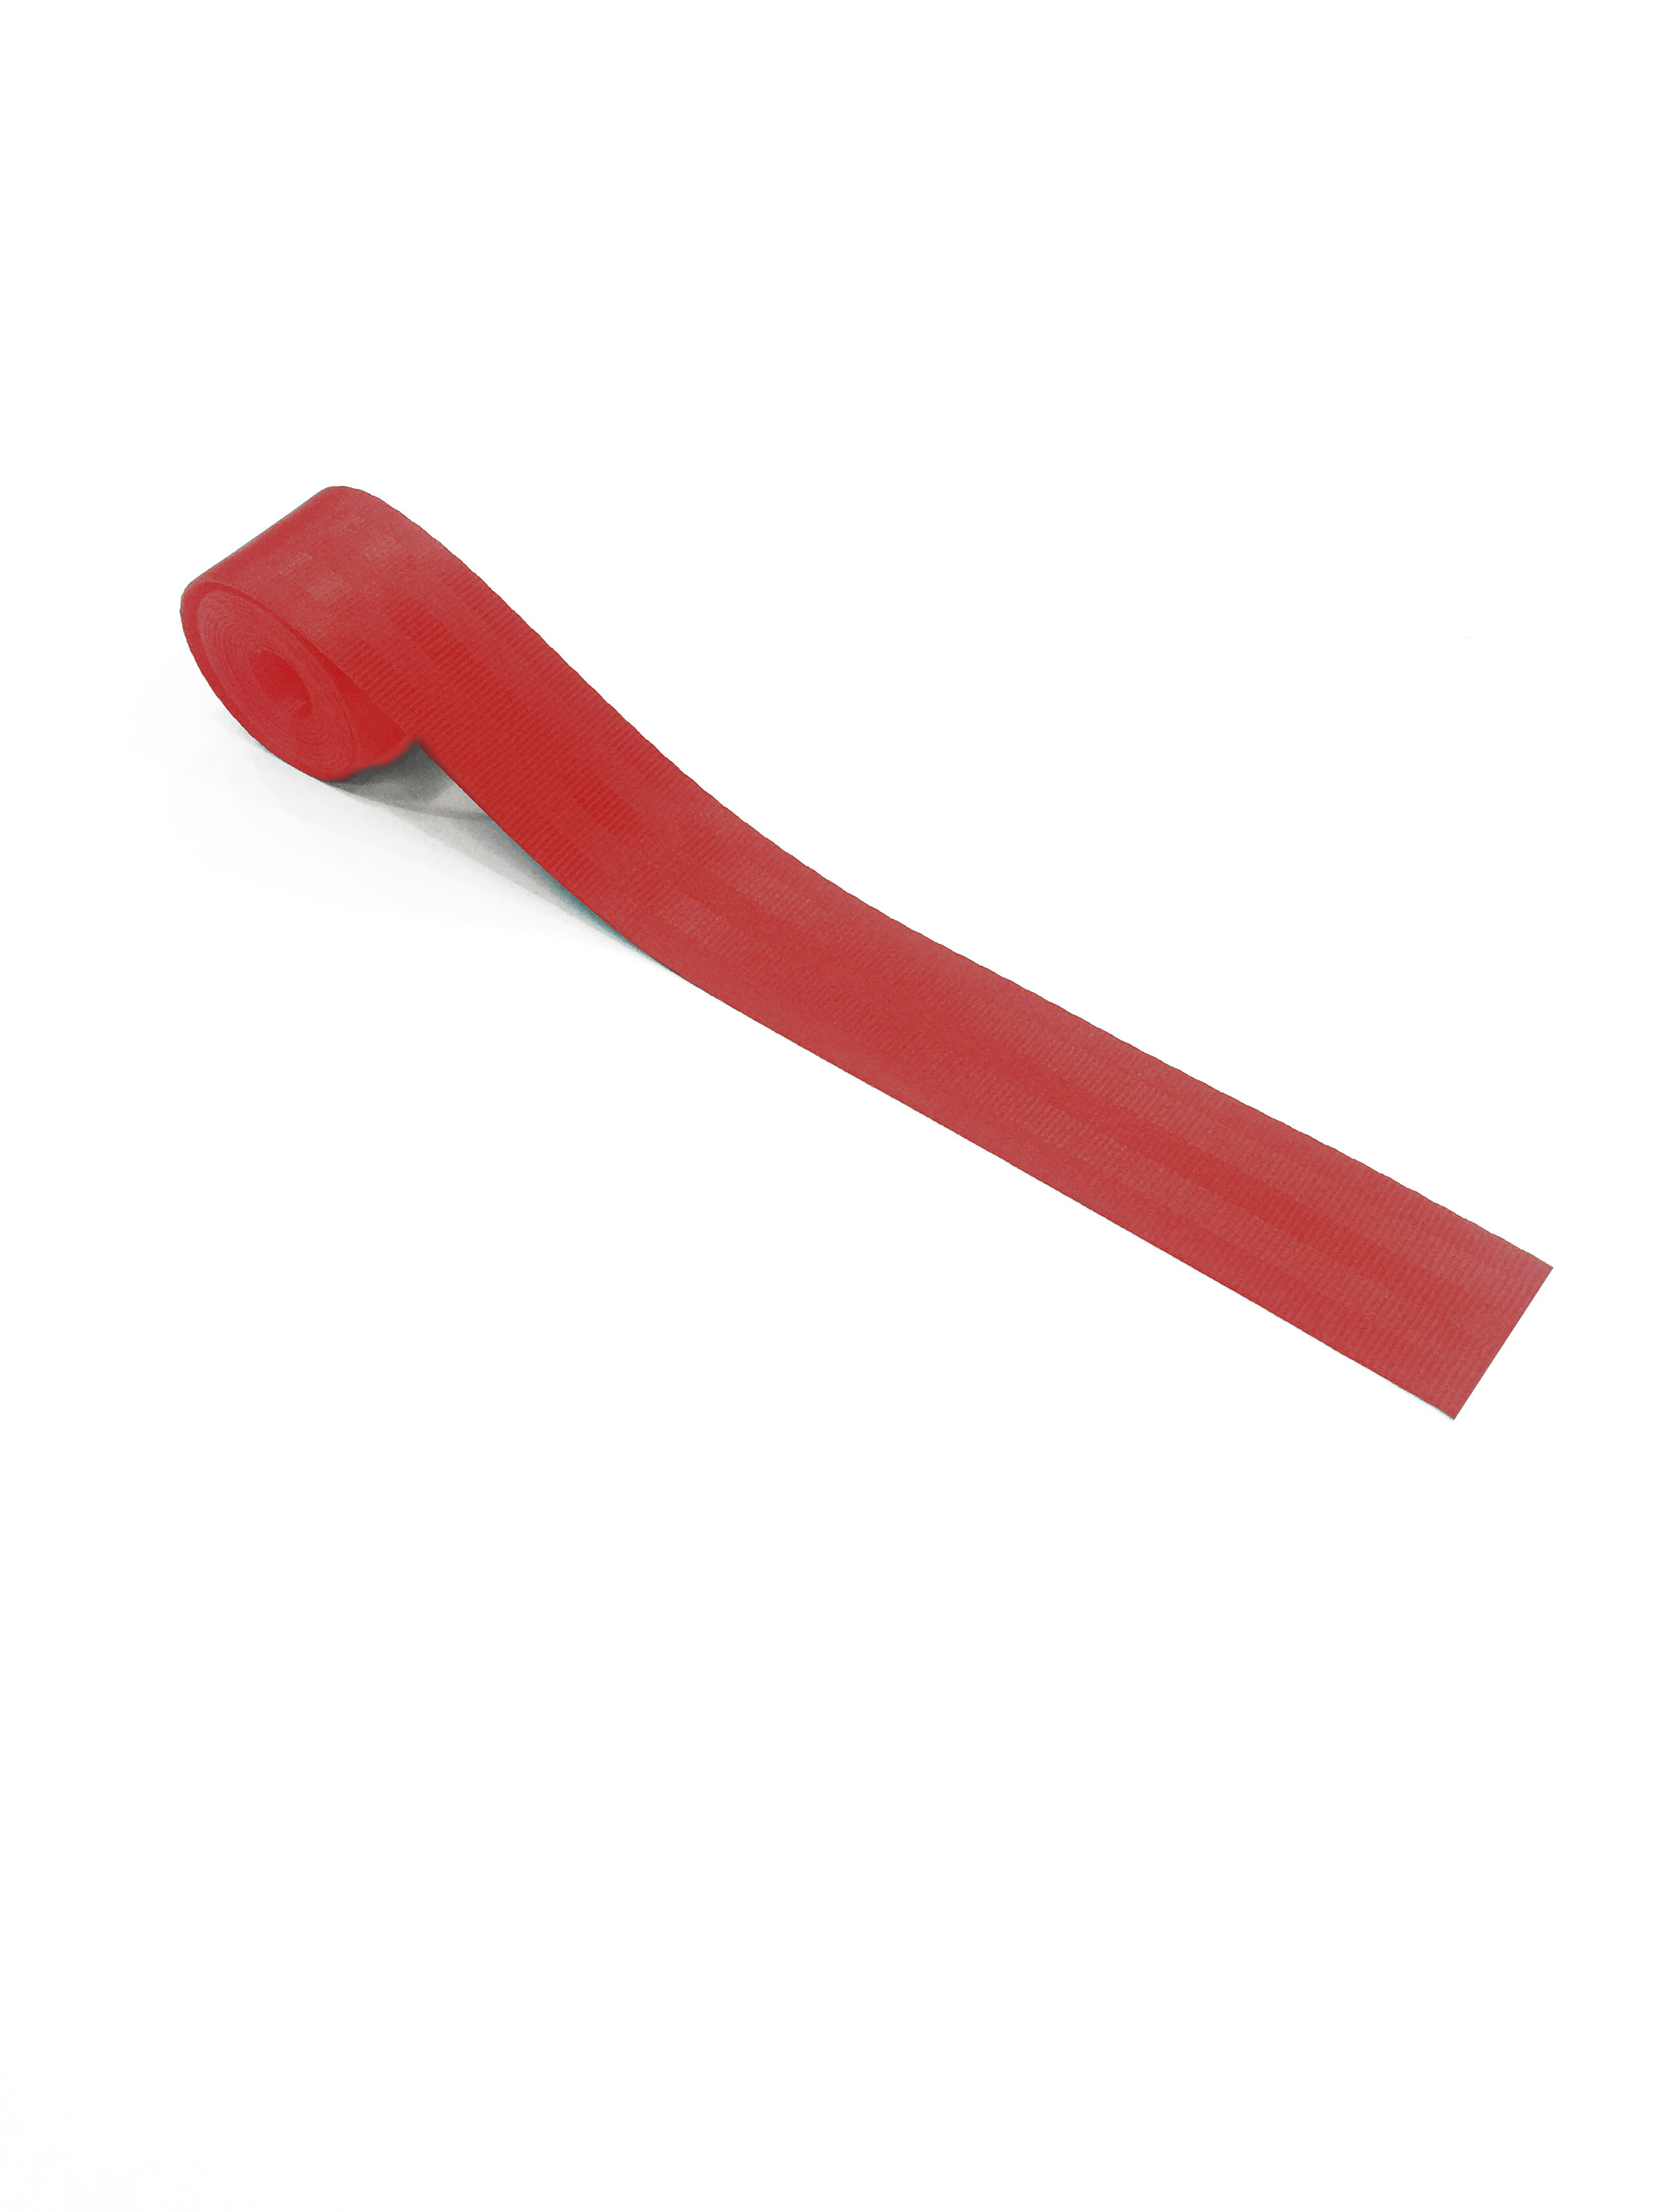 7013 Red Lifting Tape